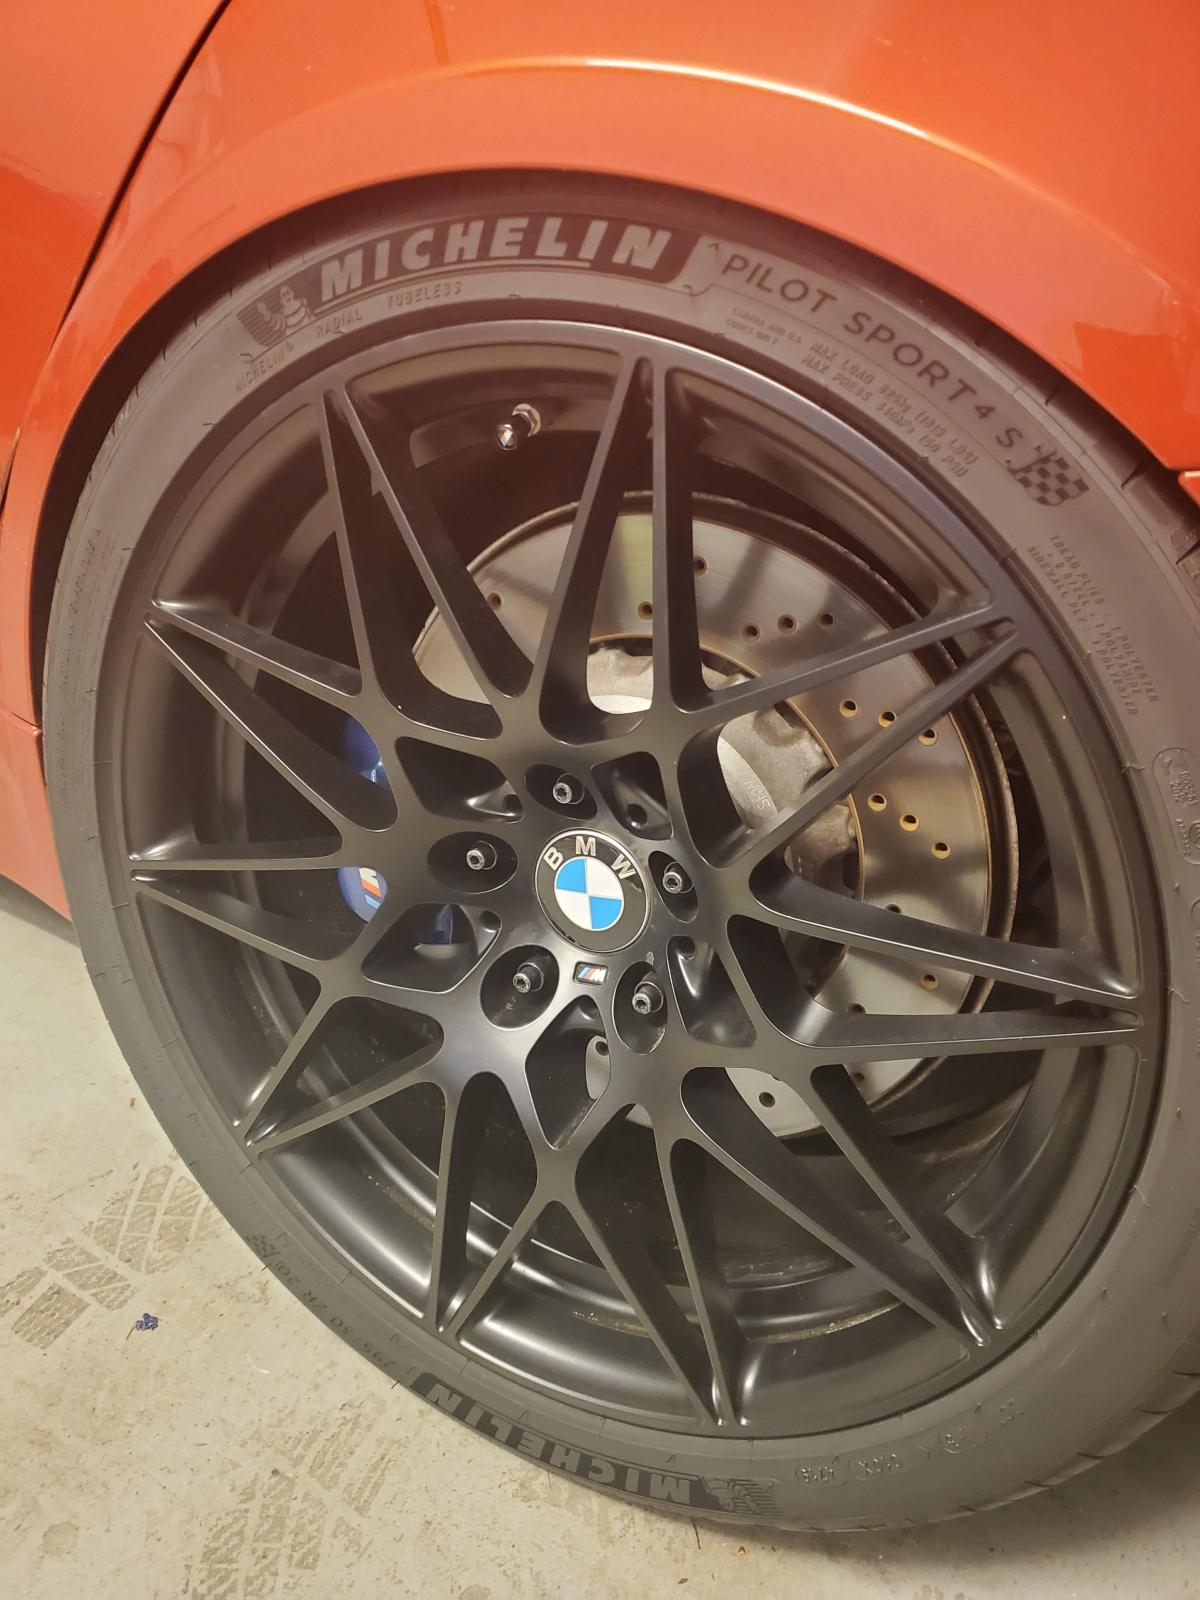 Michelin Pilot Sport 4s 285 or 295/30/20 for Rear - BMW M3 and BMW M4 Forum